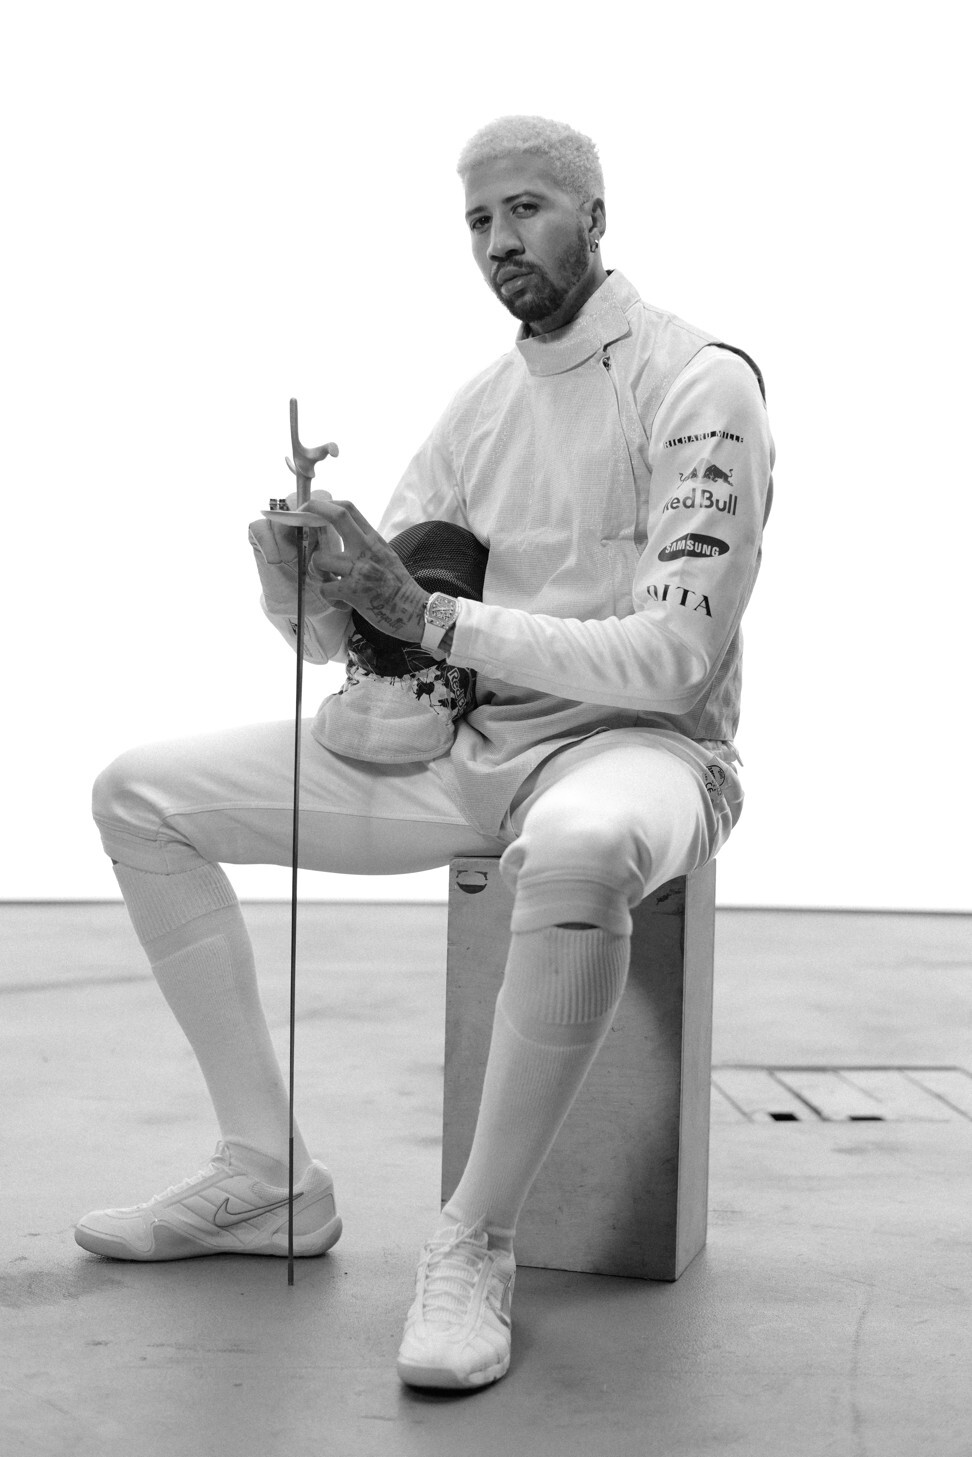 Miles Chamley-Watson, a fencer who competes for the US, is the latest athlete to join the Richard Mille family. Photo: Richard Mille